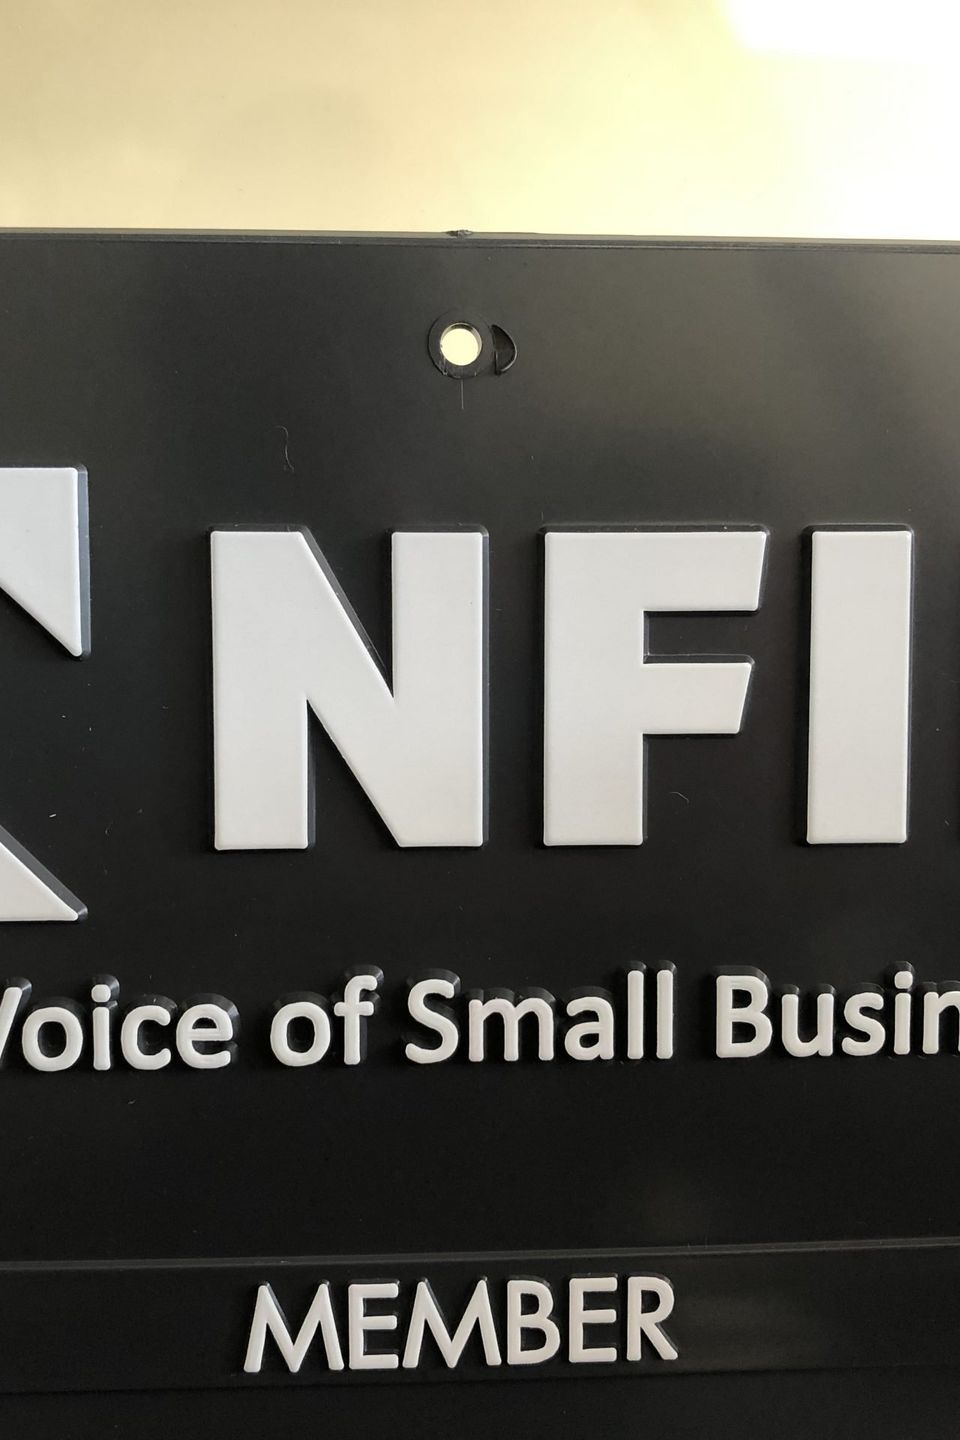 The voice of small business